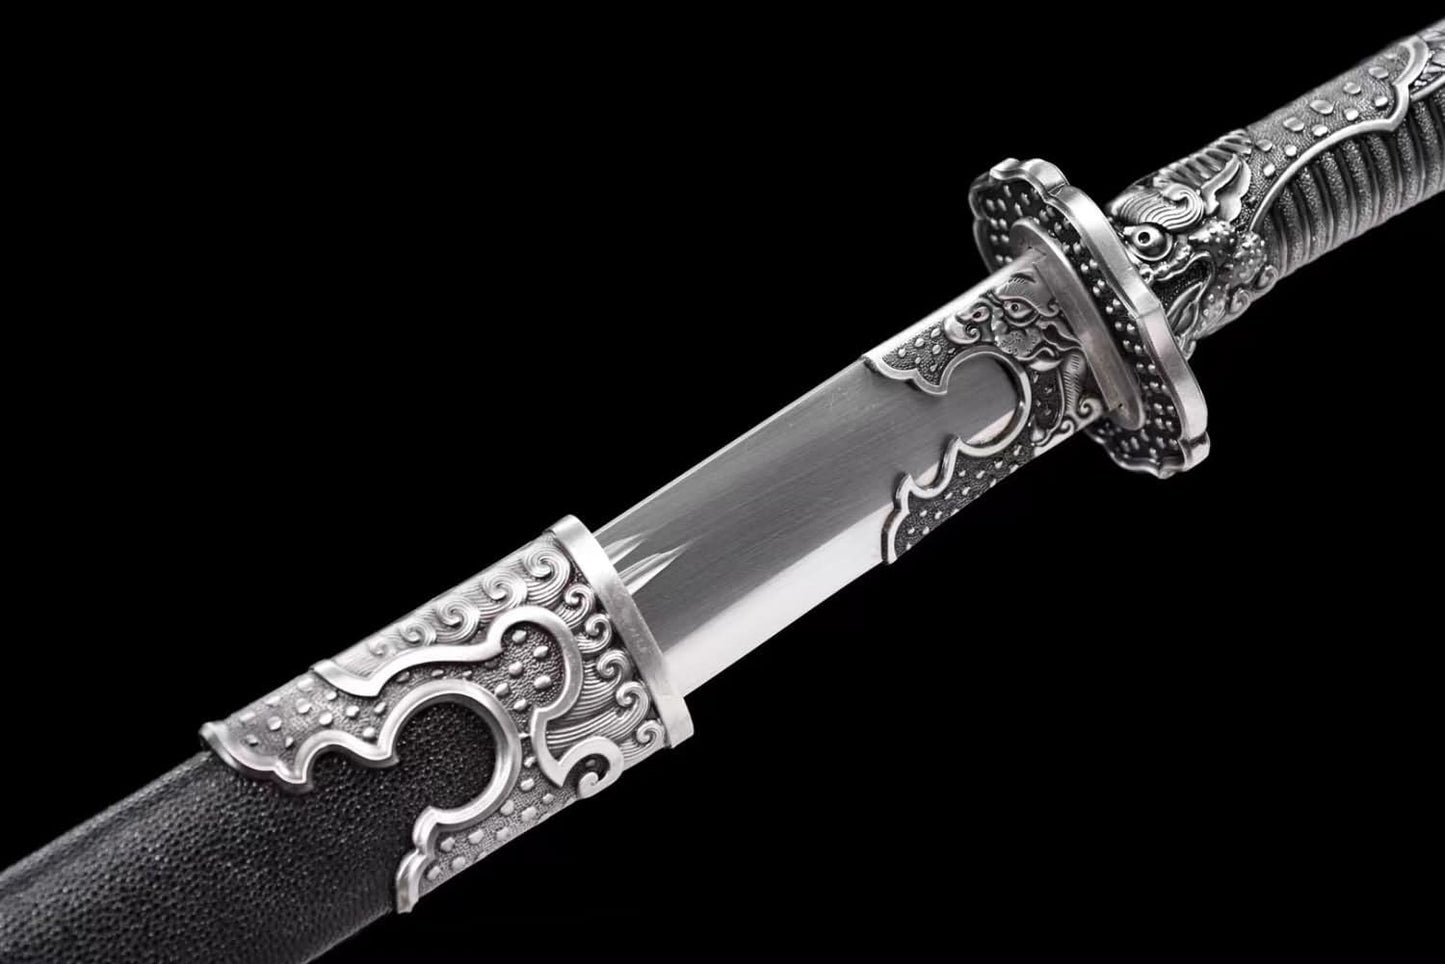 Qing dao-Traditional Craftsmanship,High Carbon Steel Blade,Alloy Fittings